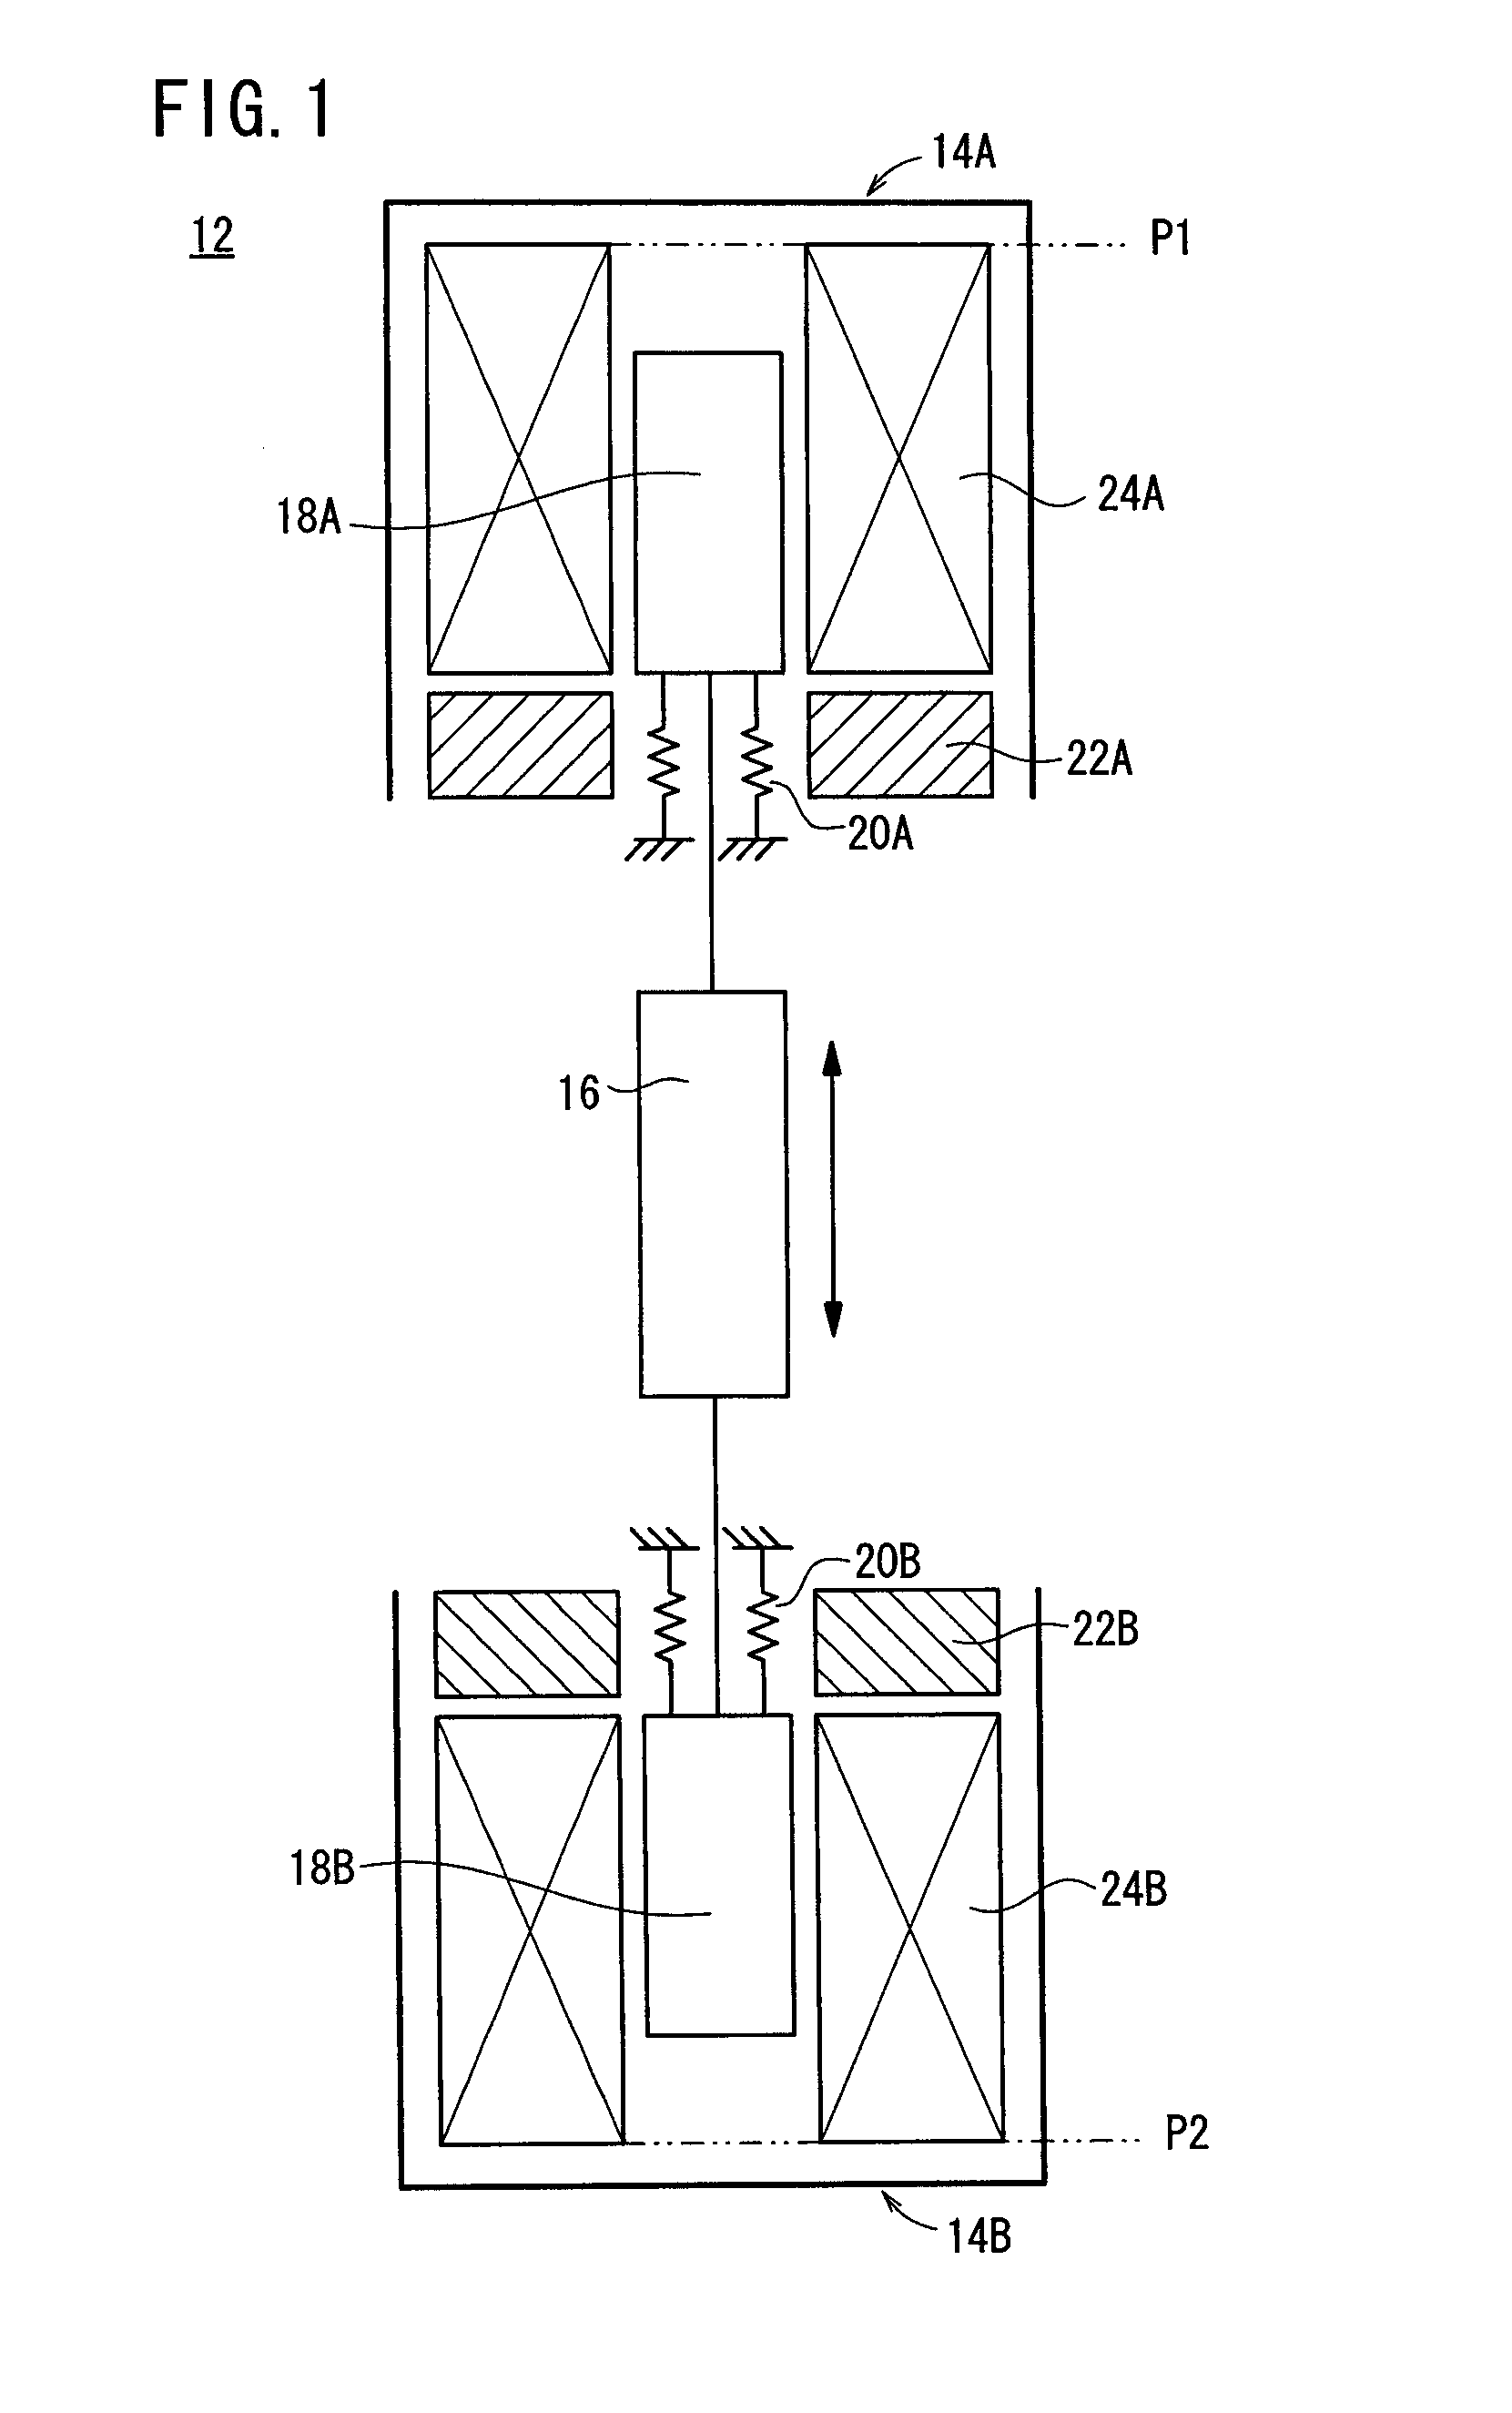 Solenoid-Operated Valve Controller